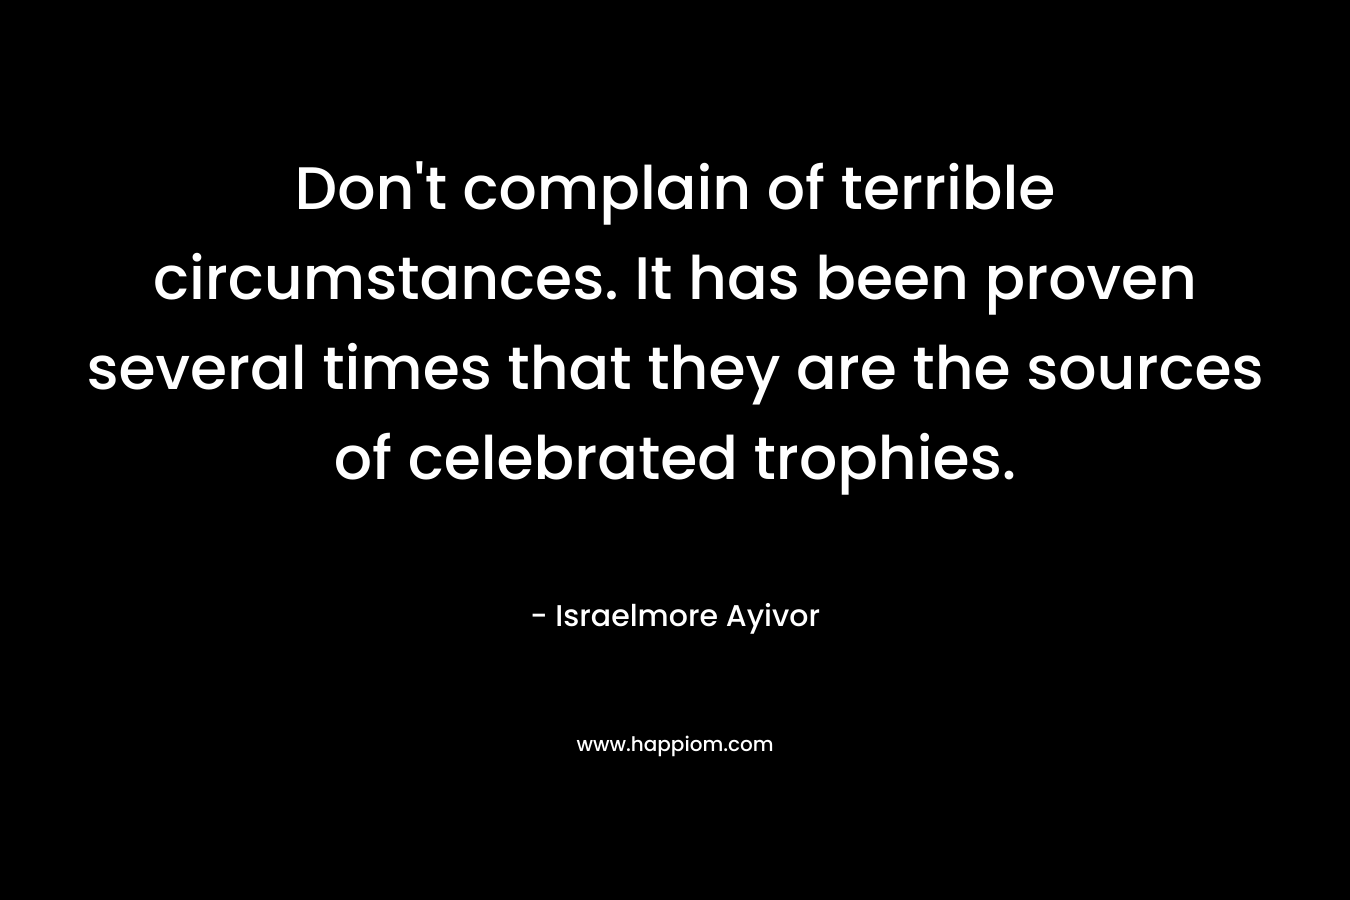 Don’t complain of terrible circumstances. It has been proven several times that they are the sources of celebrated trophies. – Israelmore Ayivor